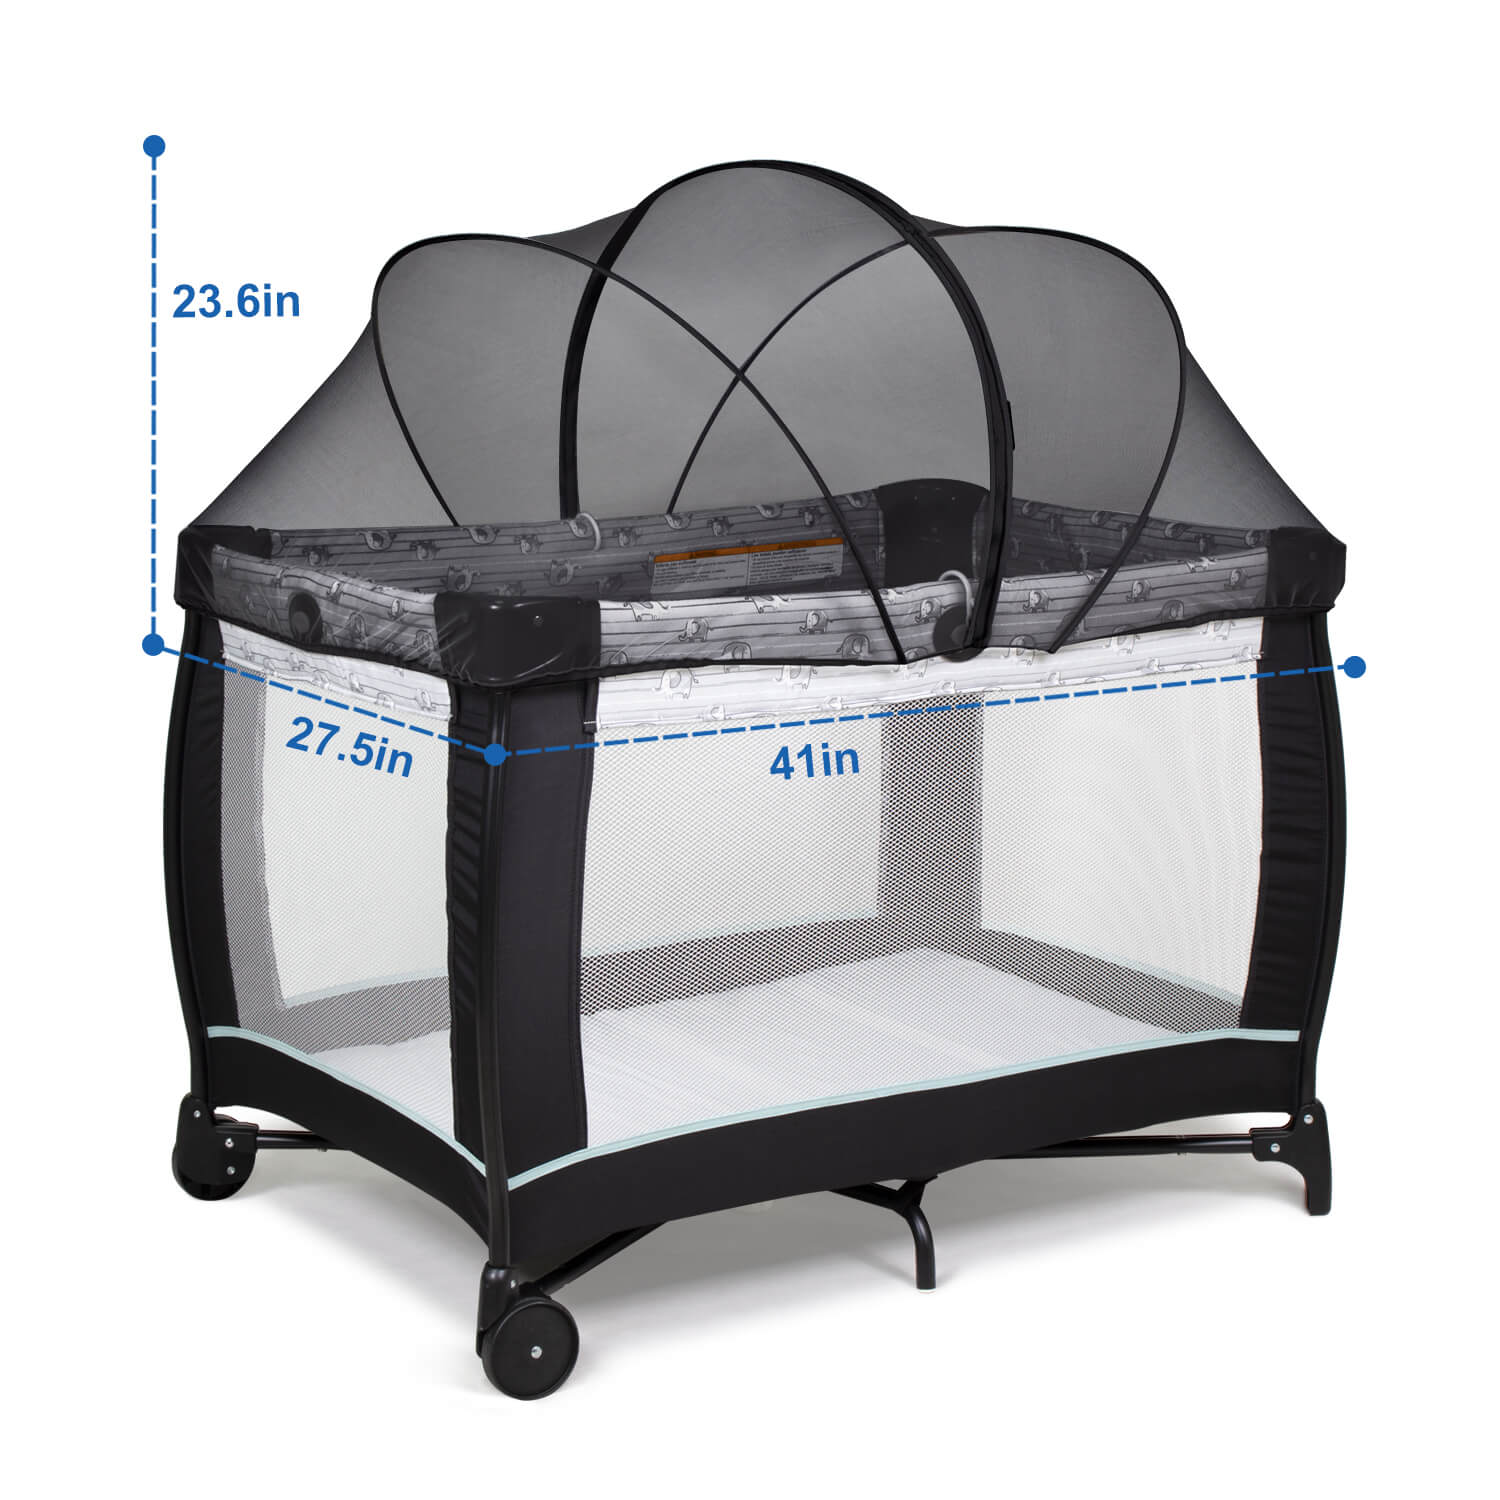 Pack and Play Playard Mosquito Net